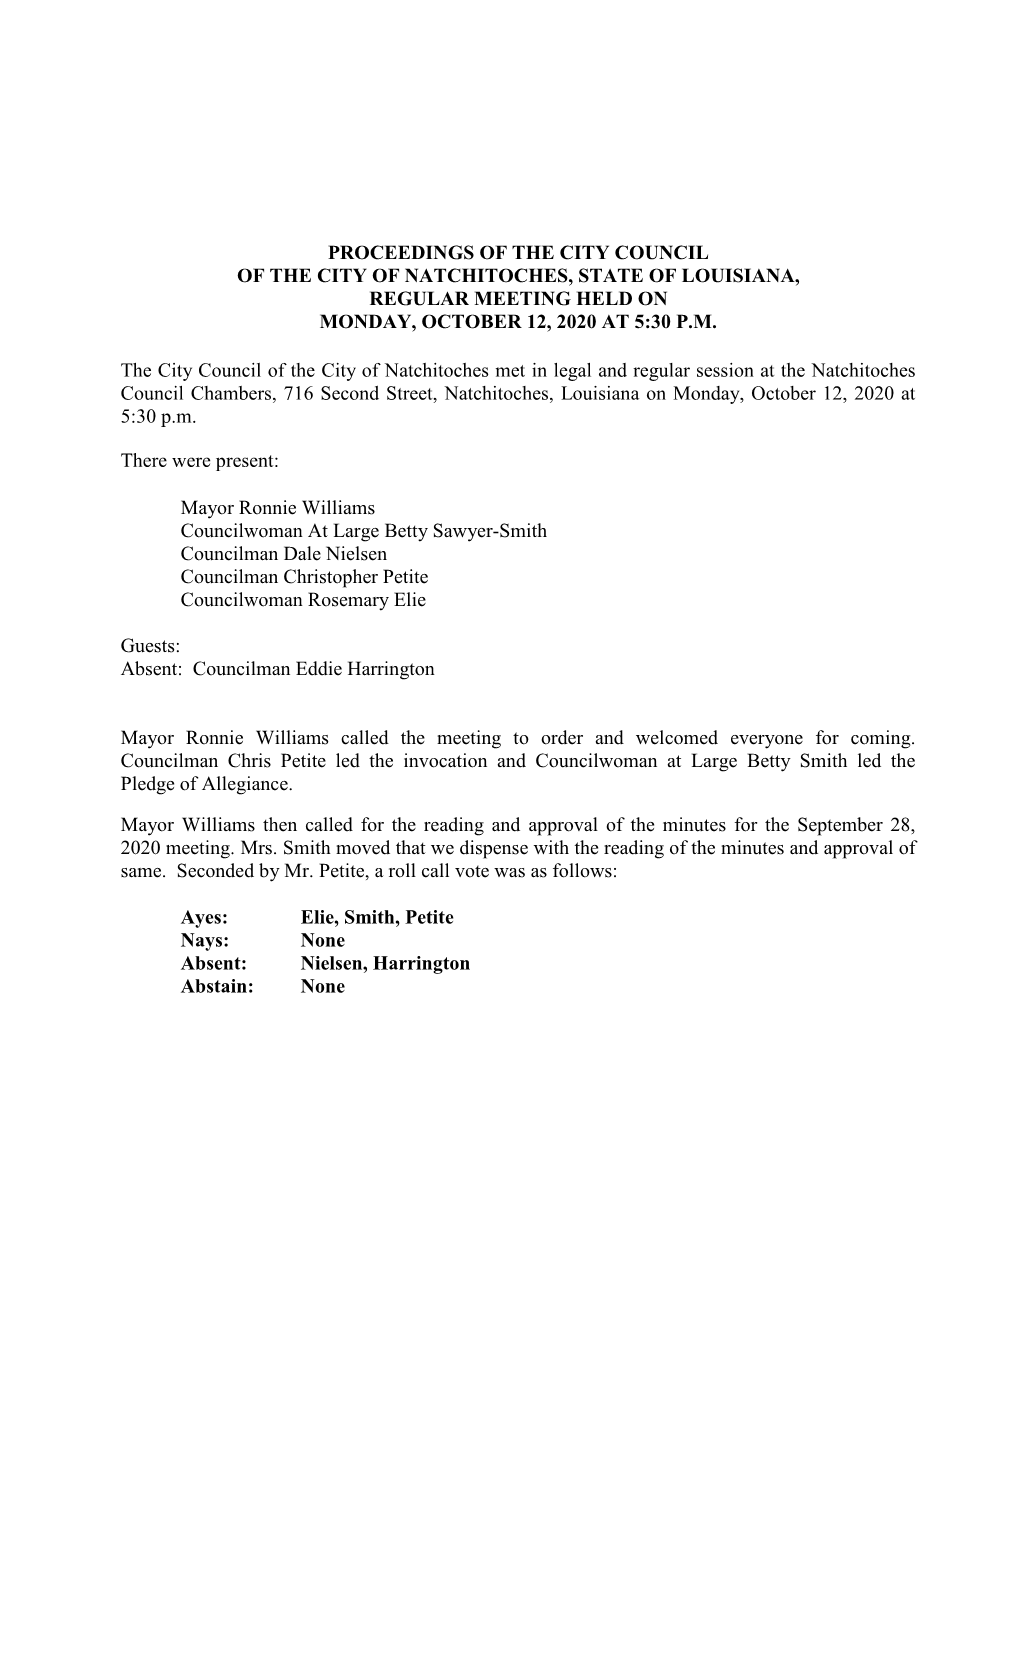 Proceedings of the City Council of the City of Natchitoches, State of Louisiana, Regular Meeting Held on Monday, October 12, 2020 at 5:30 P.M